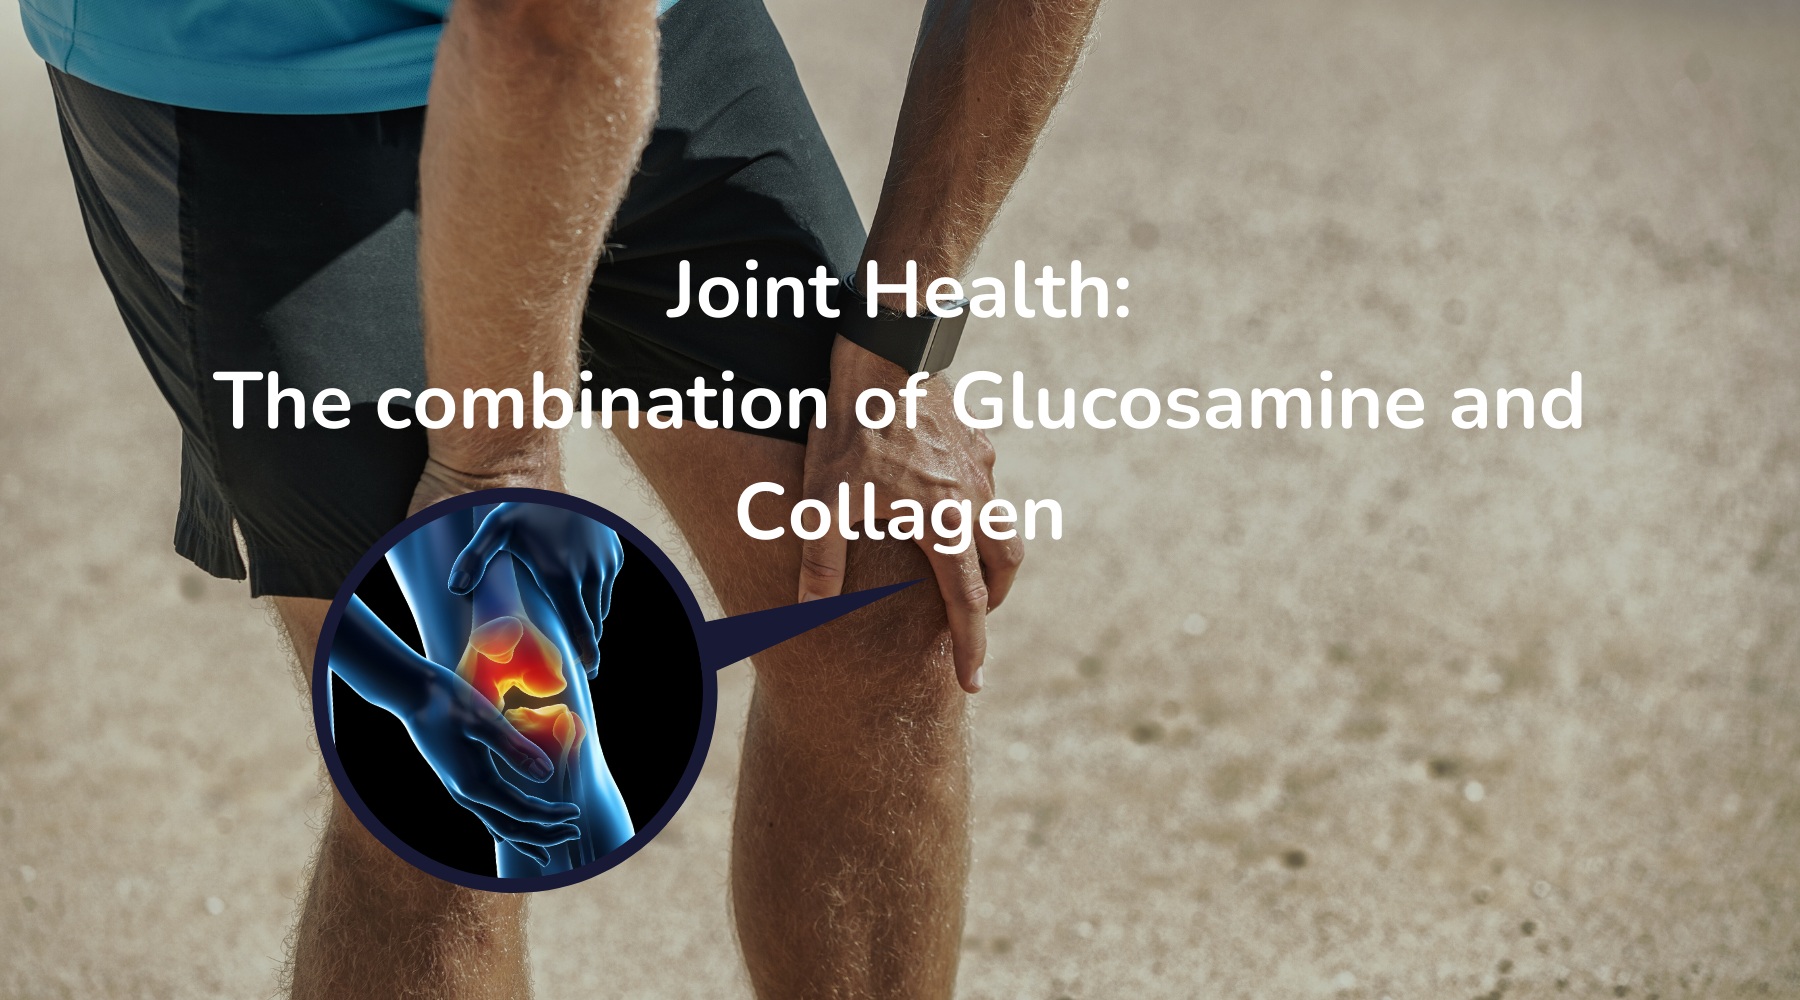 The Combination of Glucosamine and Collagen for Joint Health